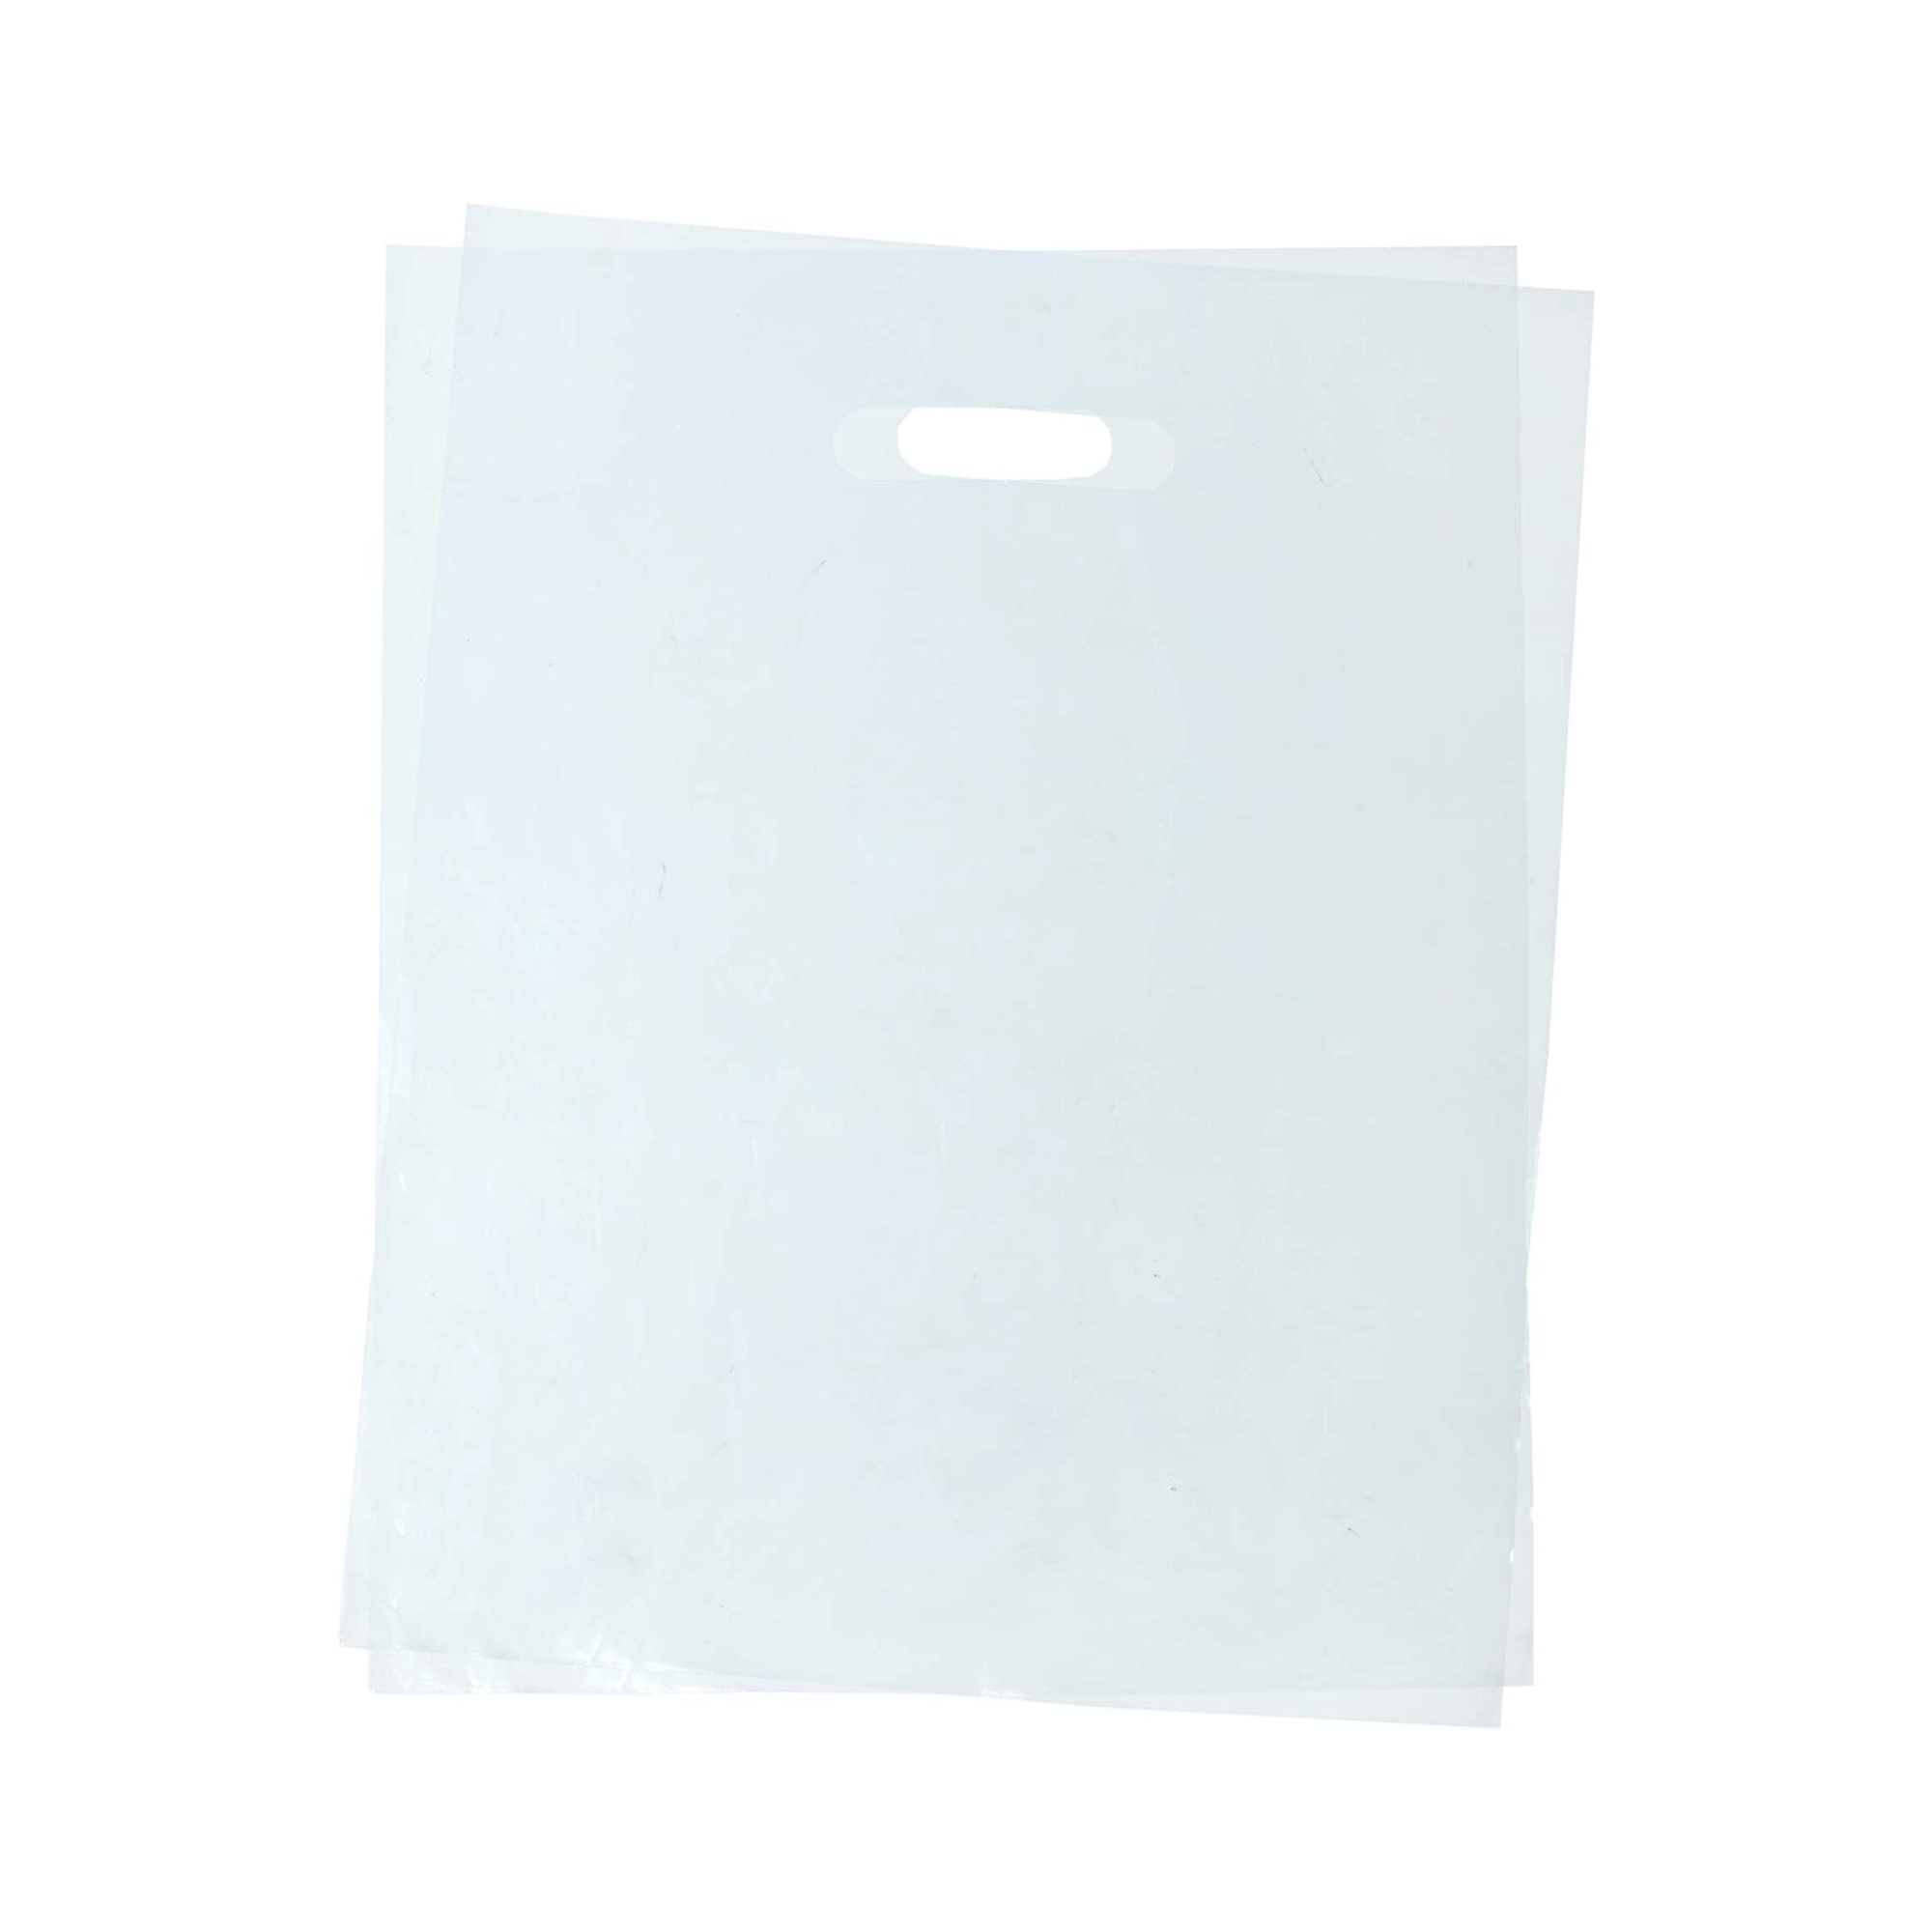 12x15 - 1.25 Mil Clear Merchandise Poly Bags for Clothing, Shopping, Tradeshow, Retails Pack of 100 - LDPE Clear Handle Bag - Infinite Pack